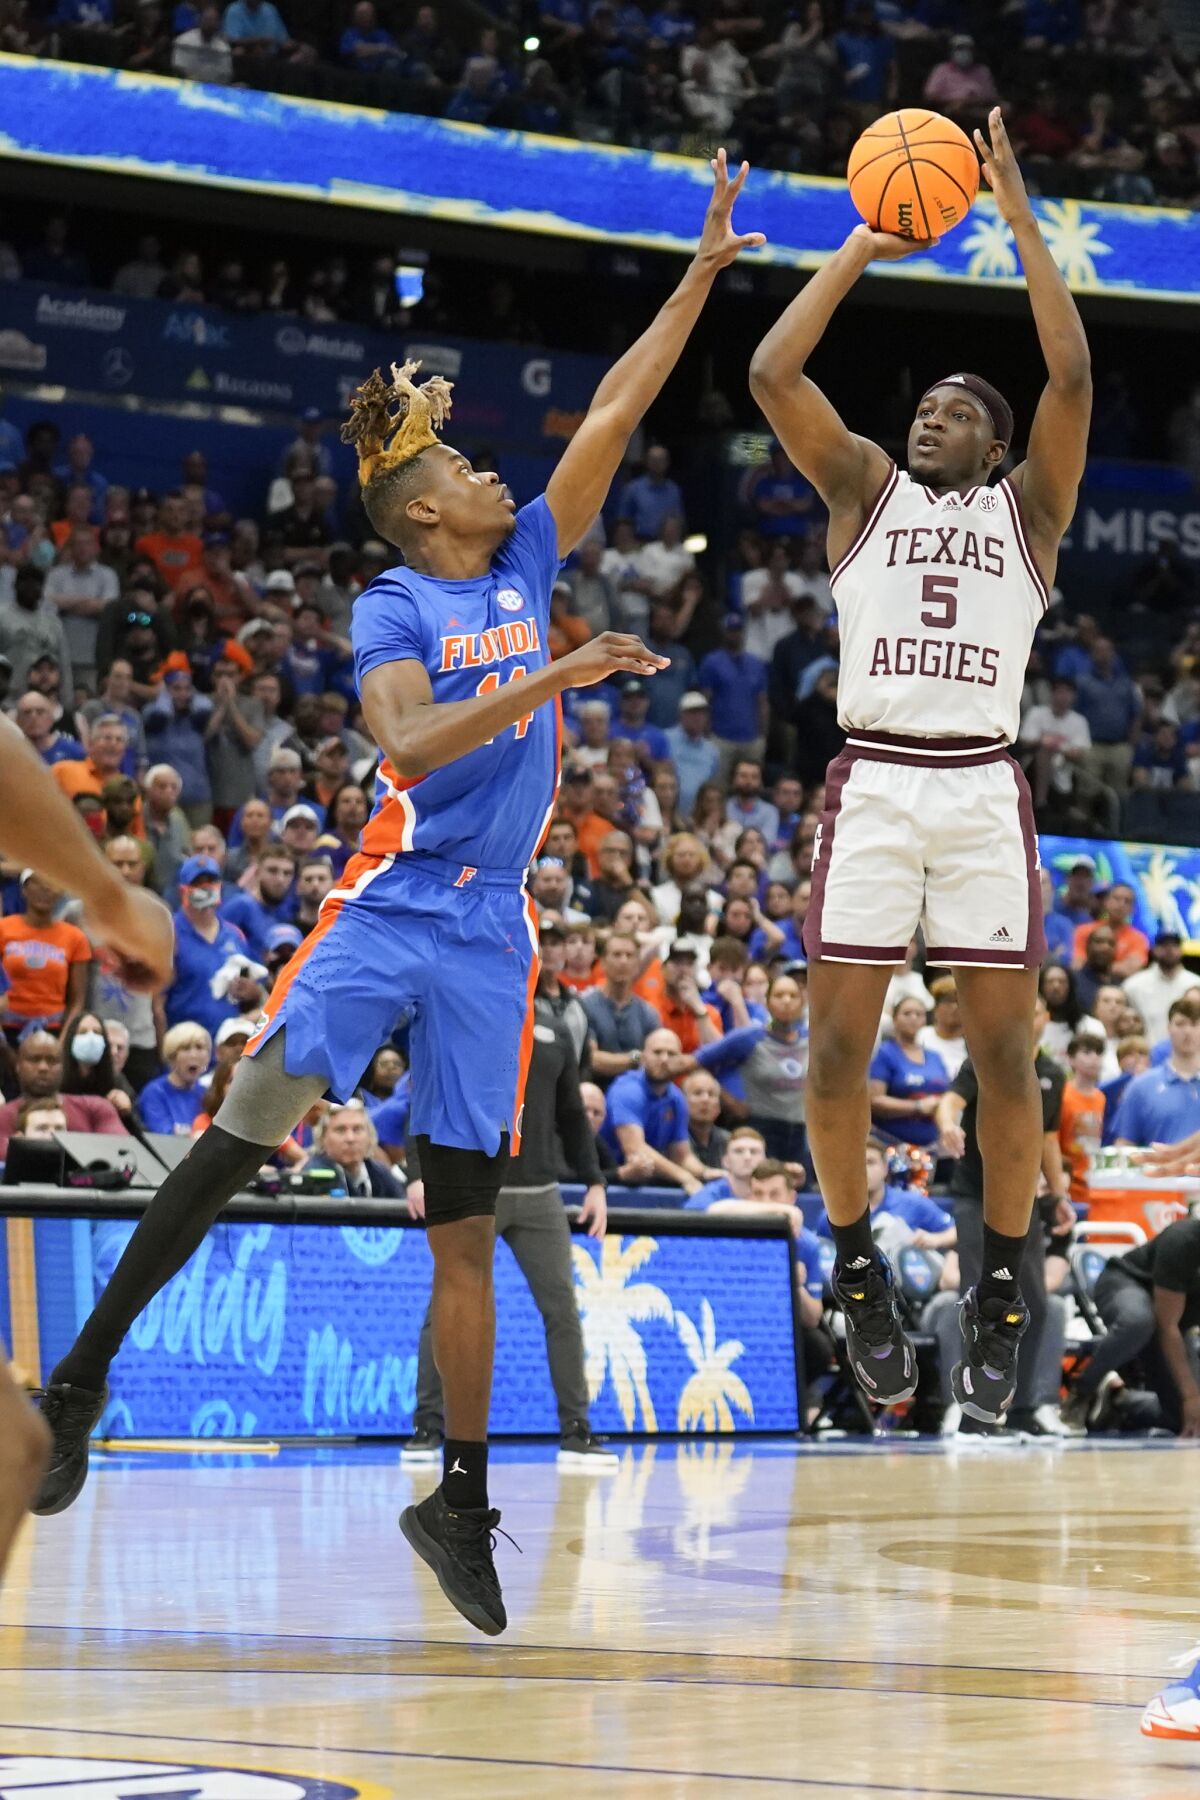 Texas A&M guard Hassan Diarra (5) makes the game-winning shot over Florida guard Kowacie Reeves (14) during overtime of an NCAA college basketball game at the Southeastern Conference tournament in Tampa, Fla., Thursday, March 10, 2022. (AP Photo/Chris O'Meara)